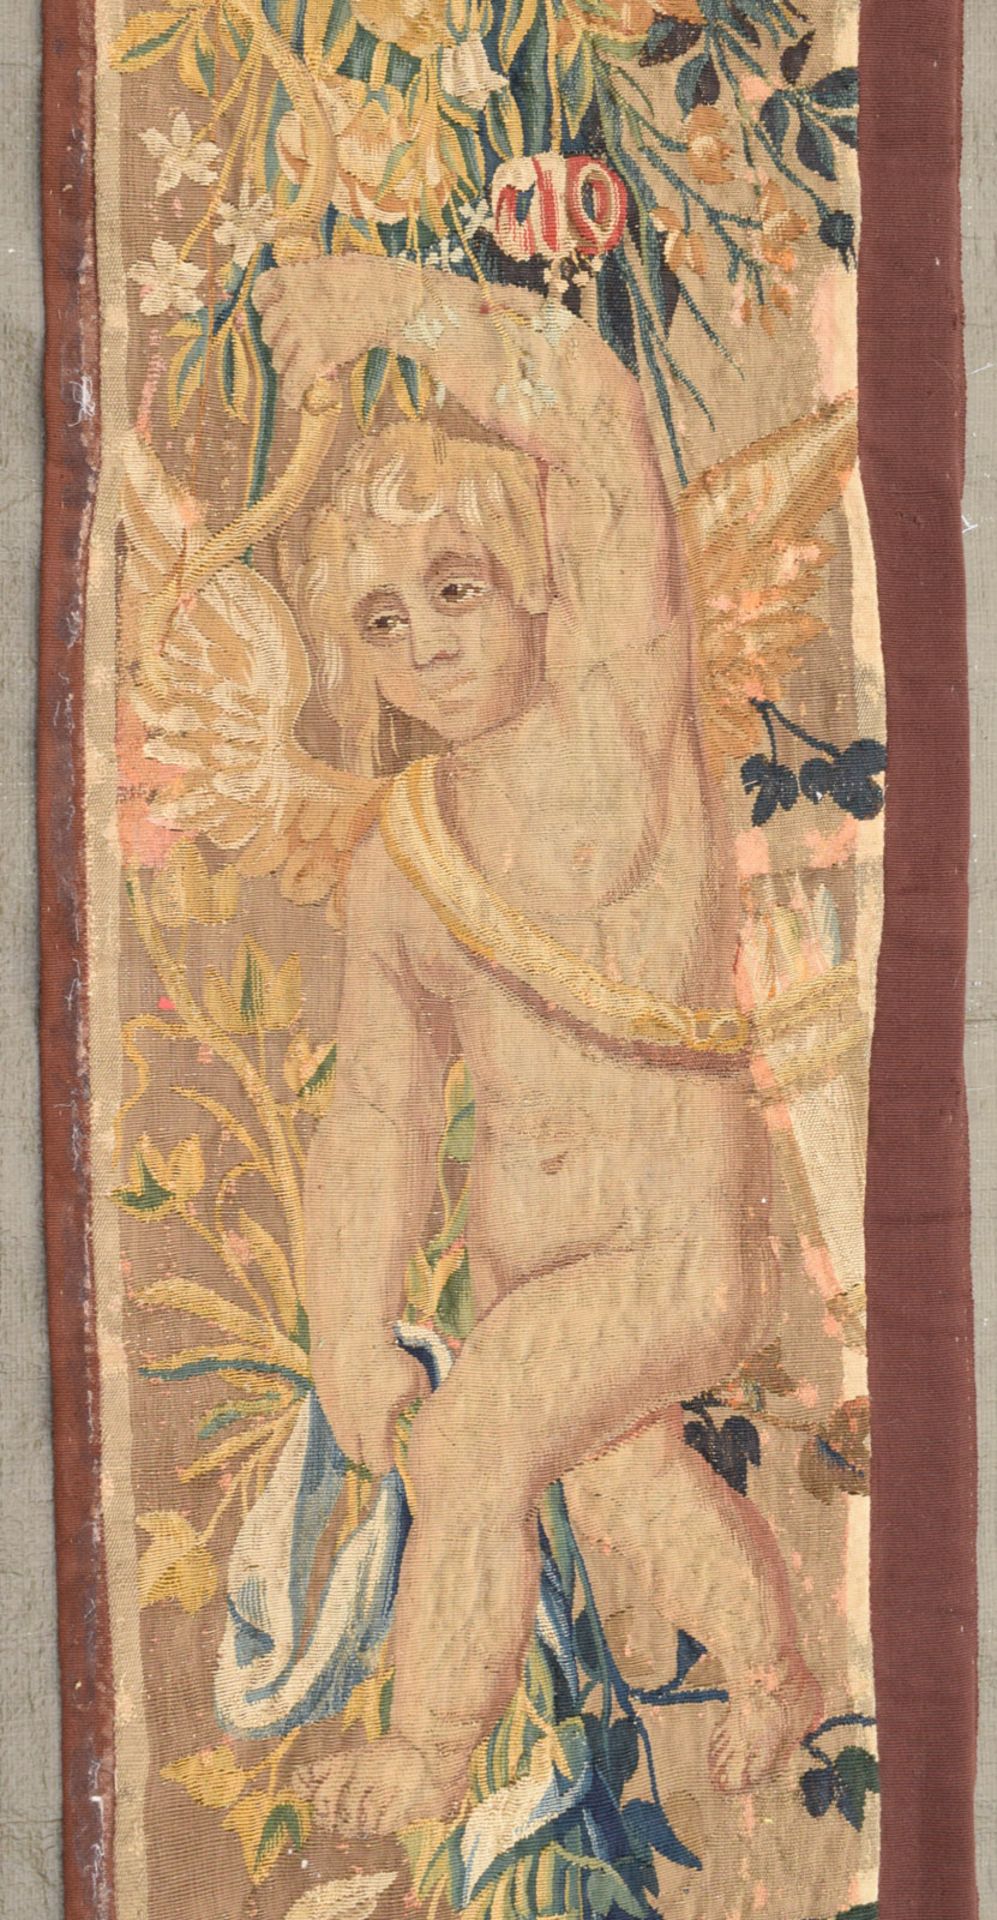 A TAPESTRY BORDER FRAGMENT USED AS A DOOR FRAME DECORATION - Image 8 of 10